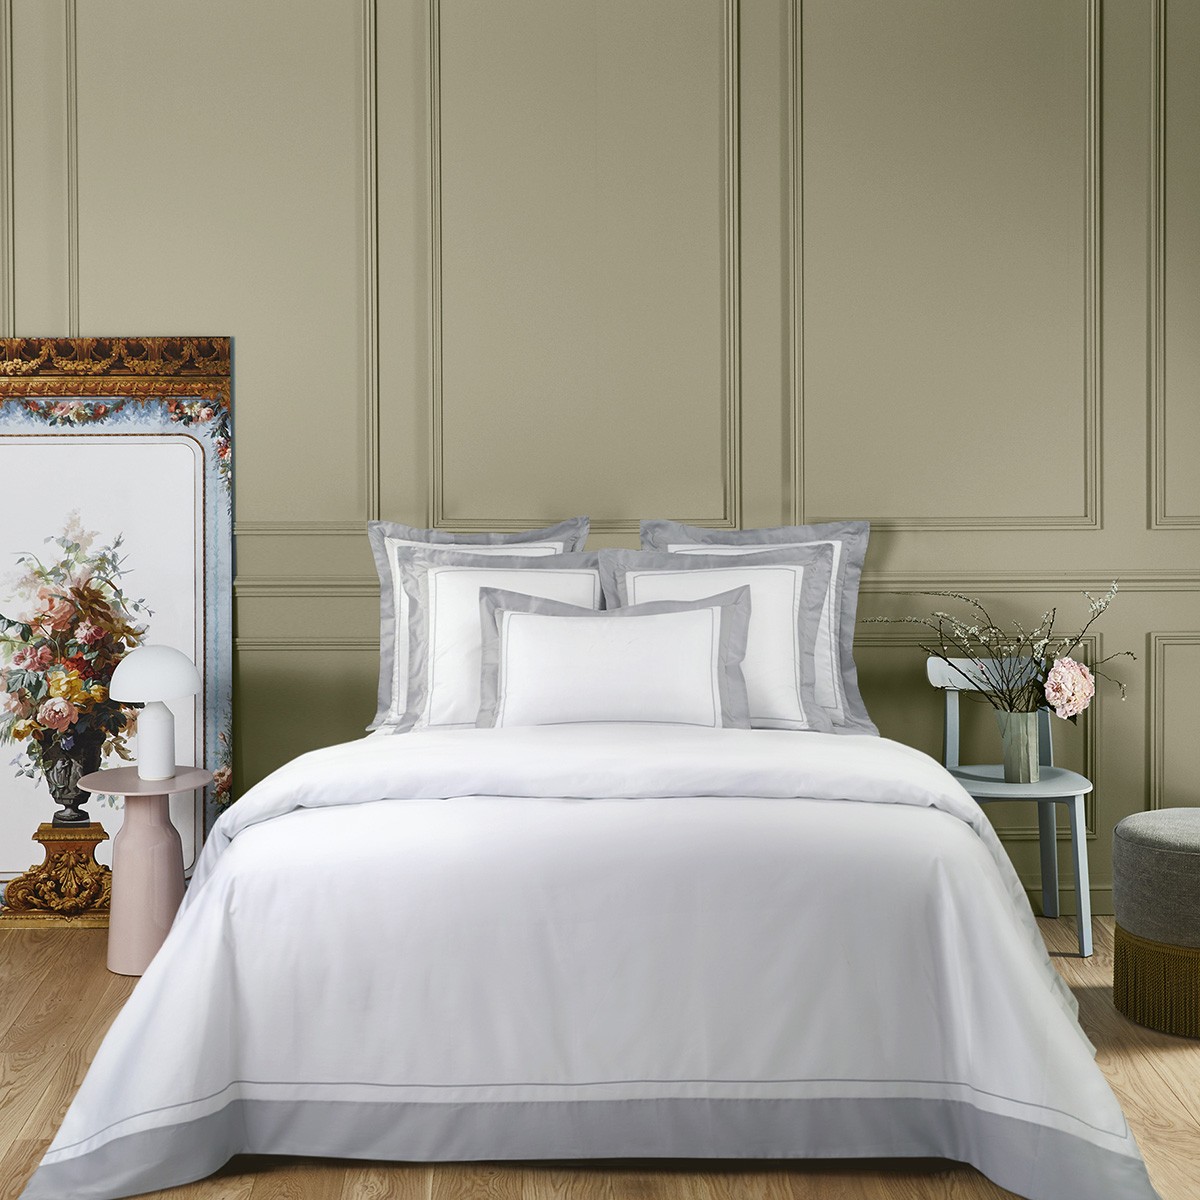 Lutece Bed Collection: Parisian Nights Cotton Sateen Bedding